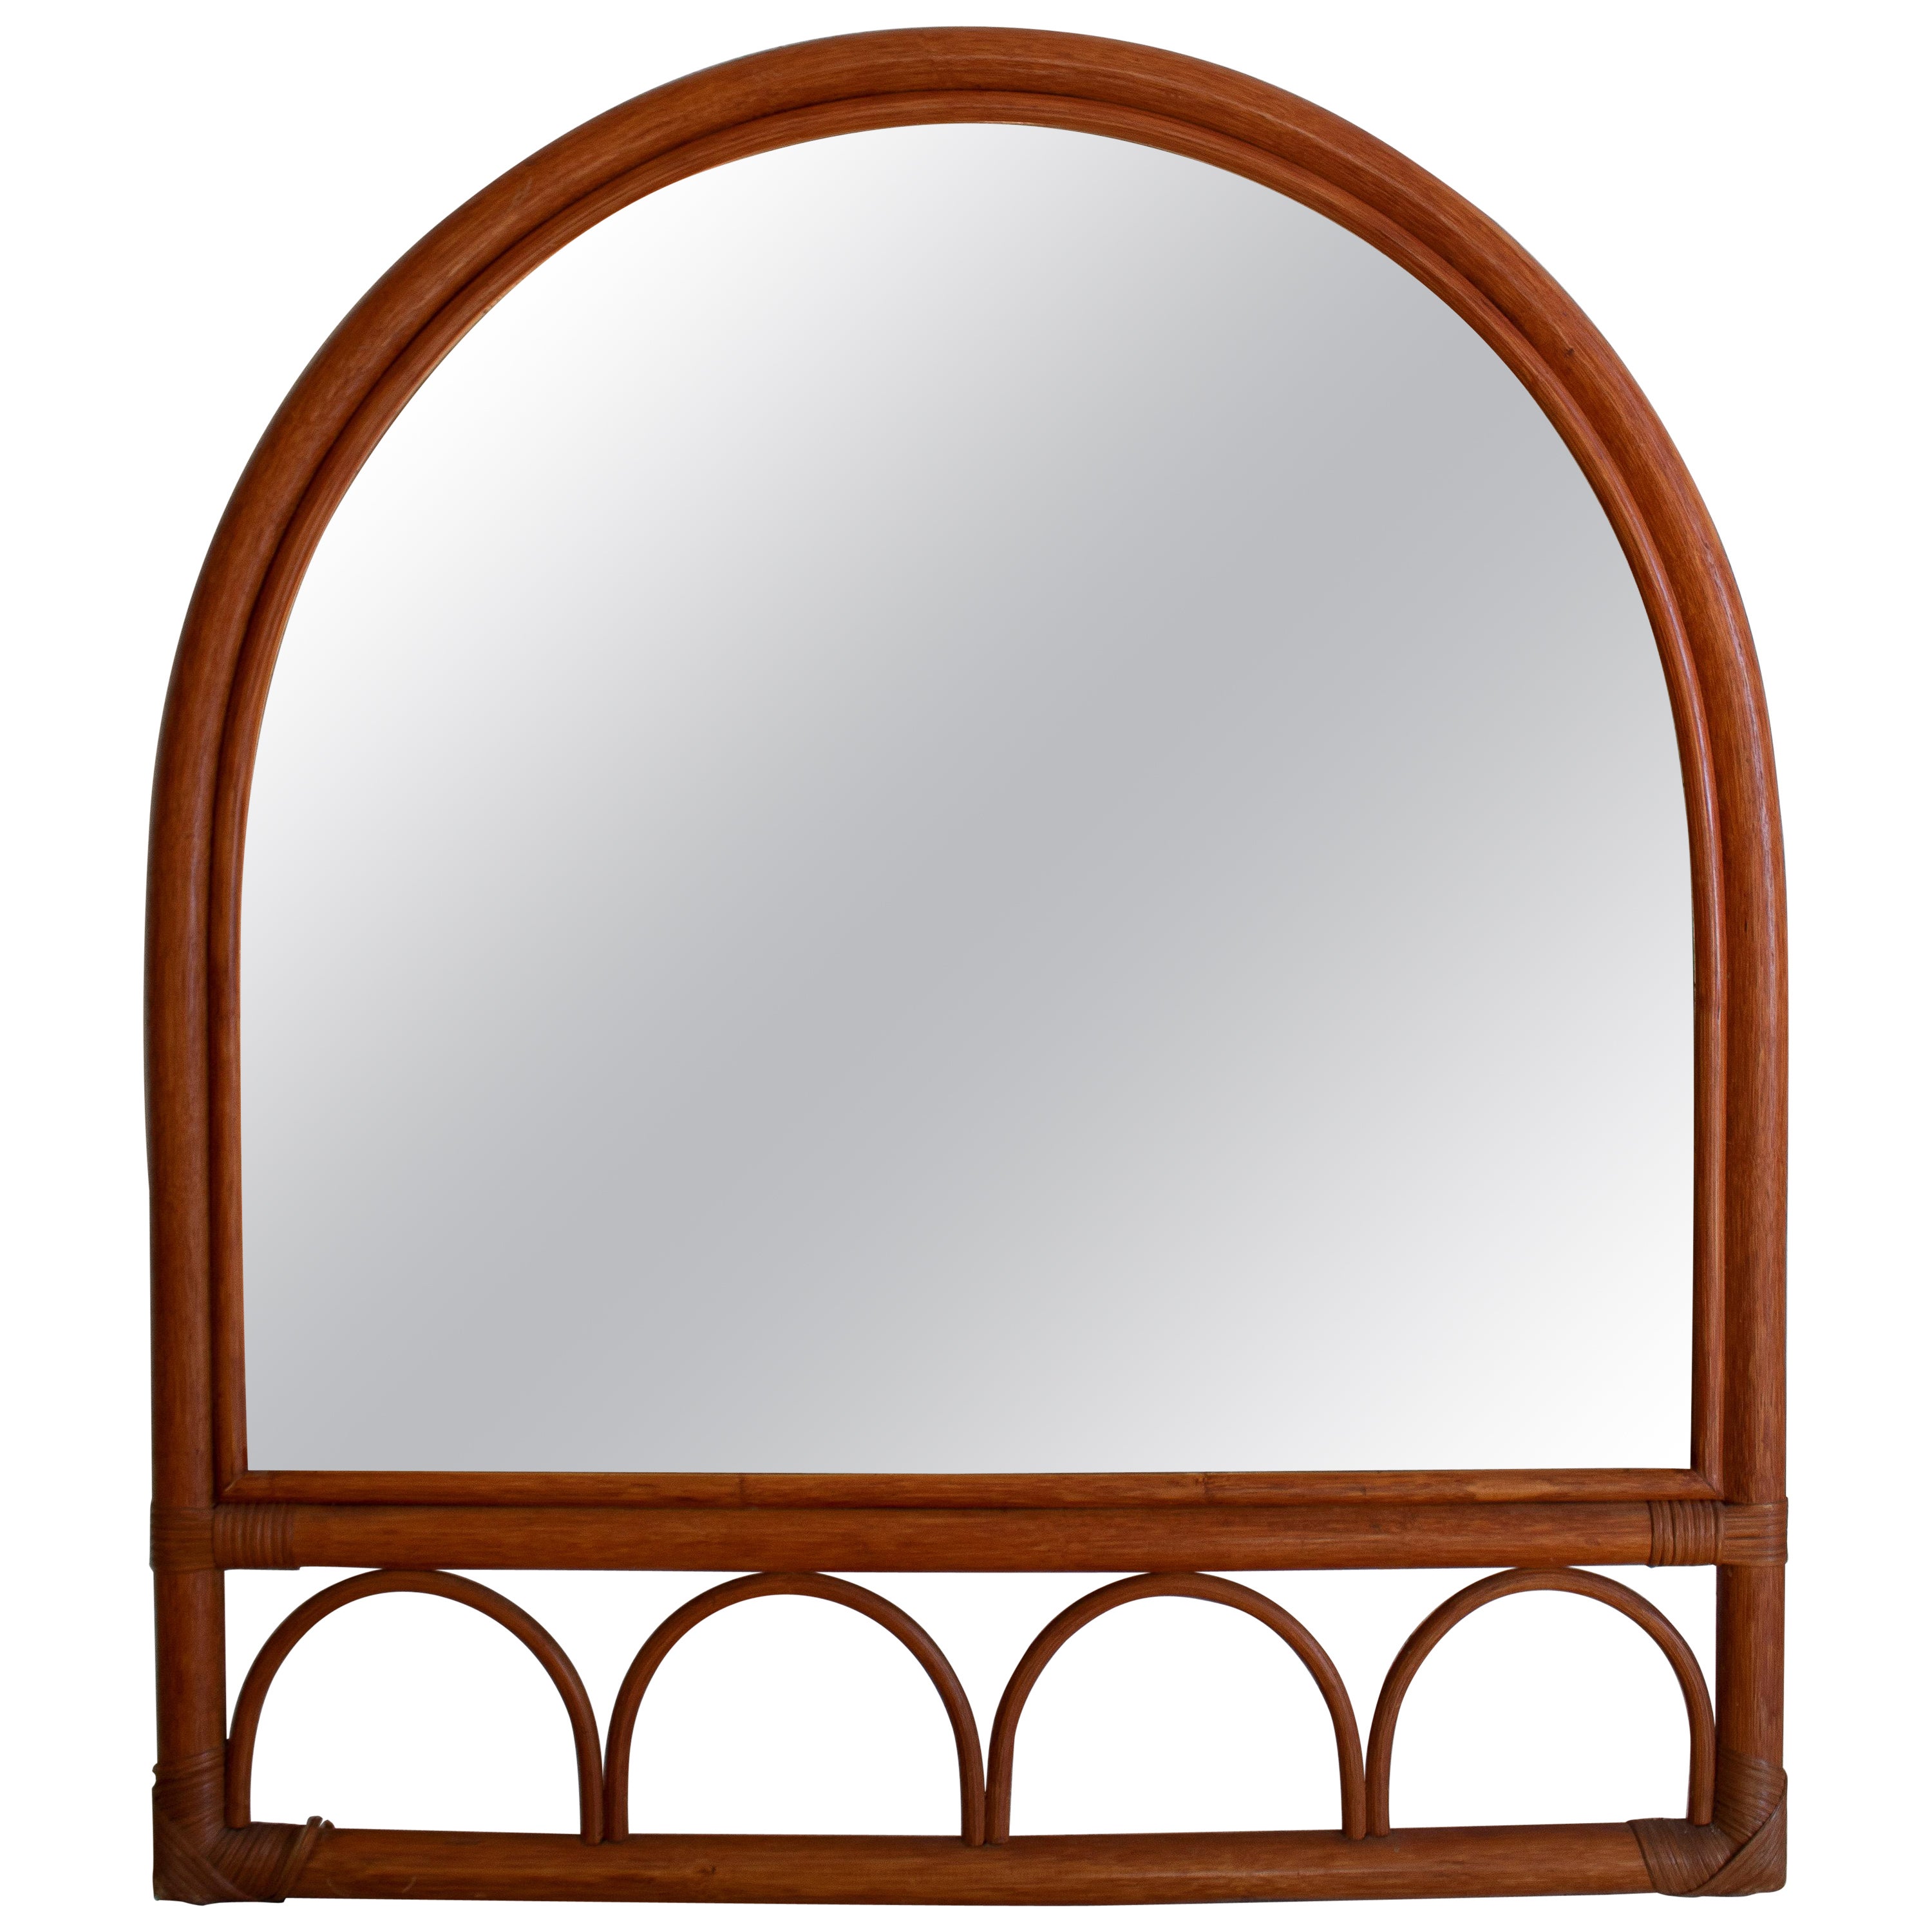 1980s Spanish Bamboo Arched Mirror For Sale